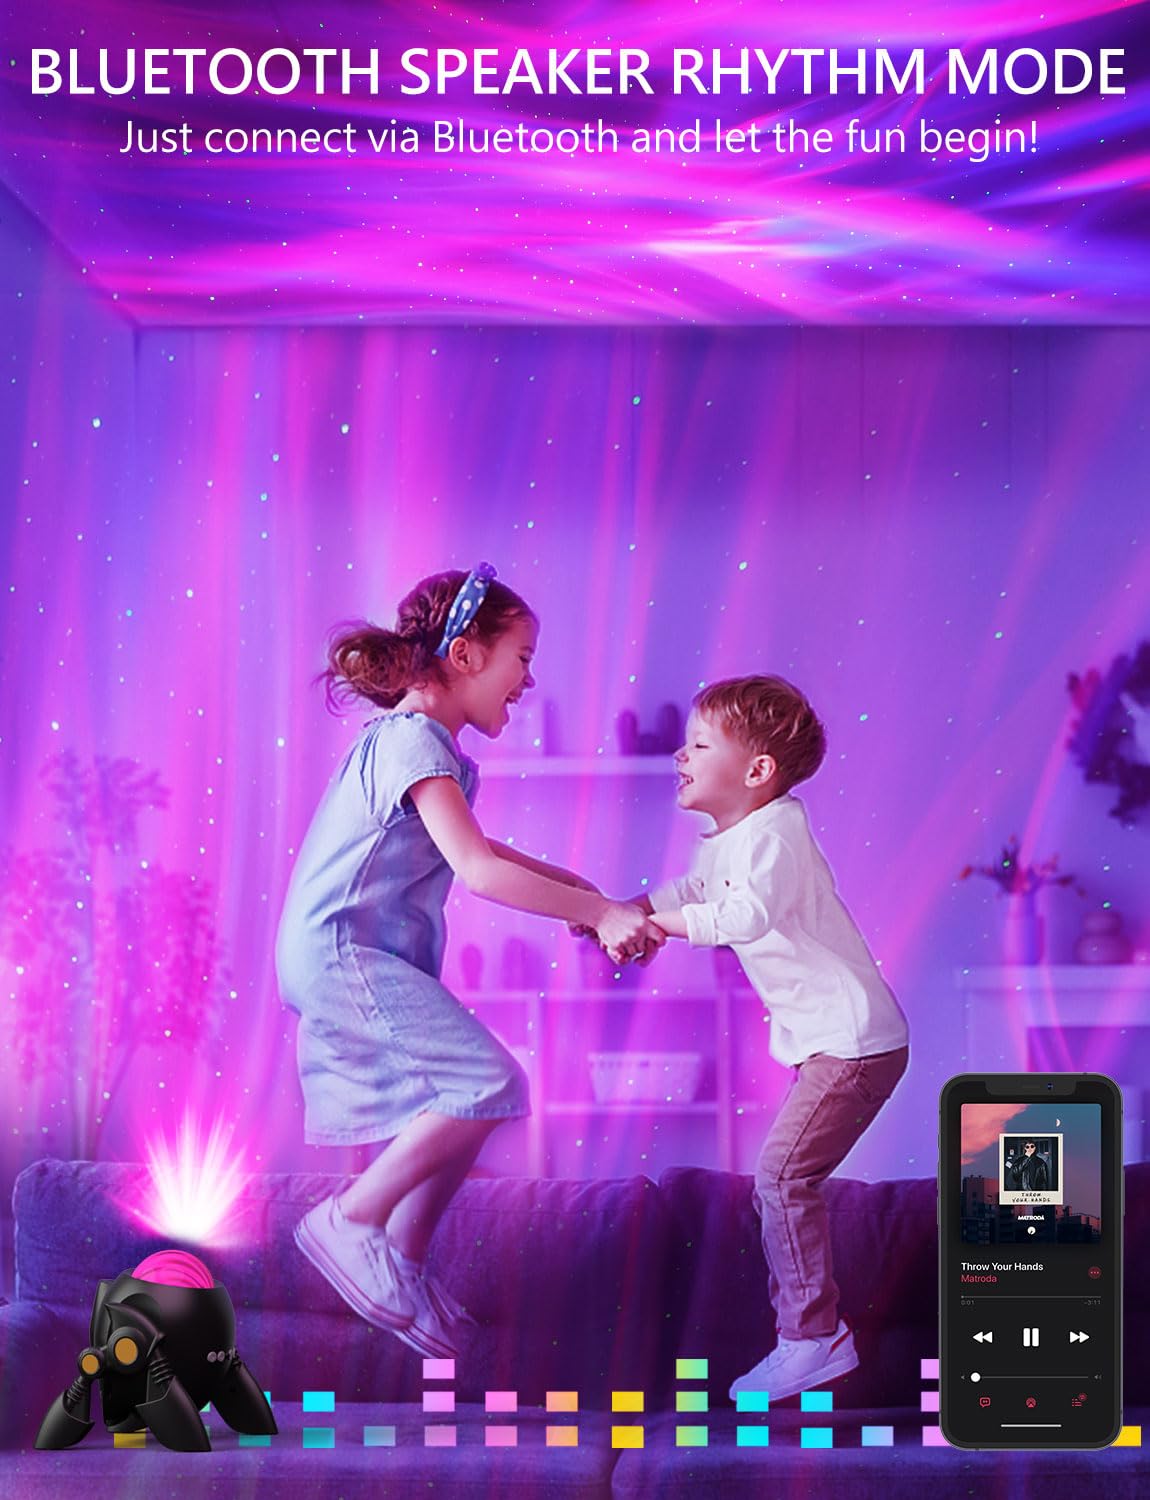 YOVAKO Star Projector, Night Light Projector with Music Speaker, Galaxy Projector with Remote Control, Aurora Projector with White Noise, Ceiling Projector Lights for Bedroom, Kids, Adults, Party